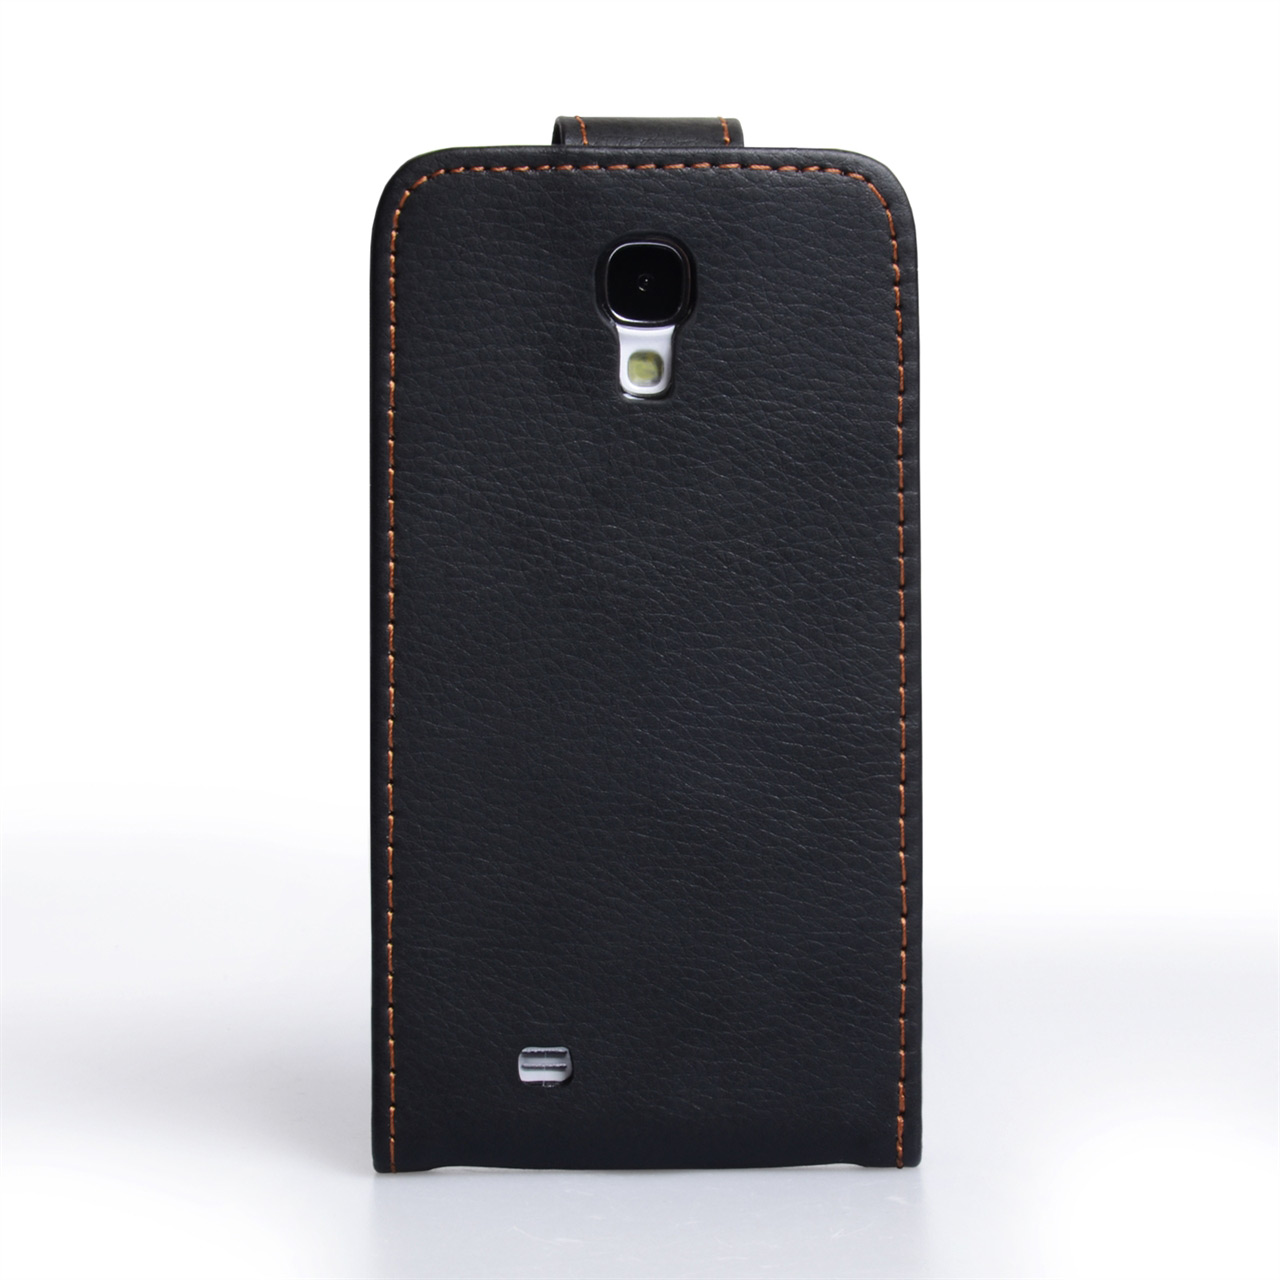 YouSave Accessories Samsung Galaxy S4 Leather Effect Flip Case - Black